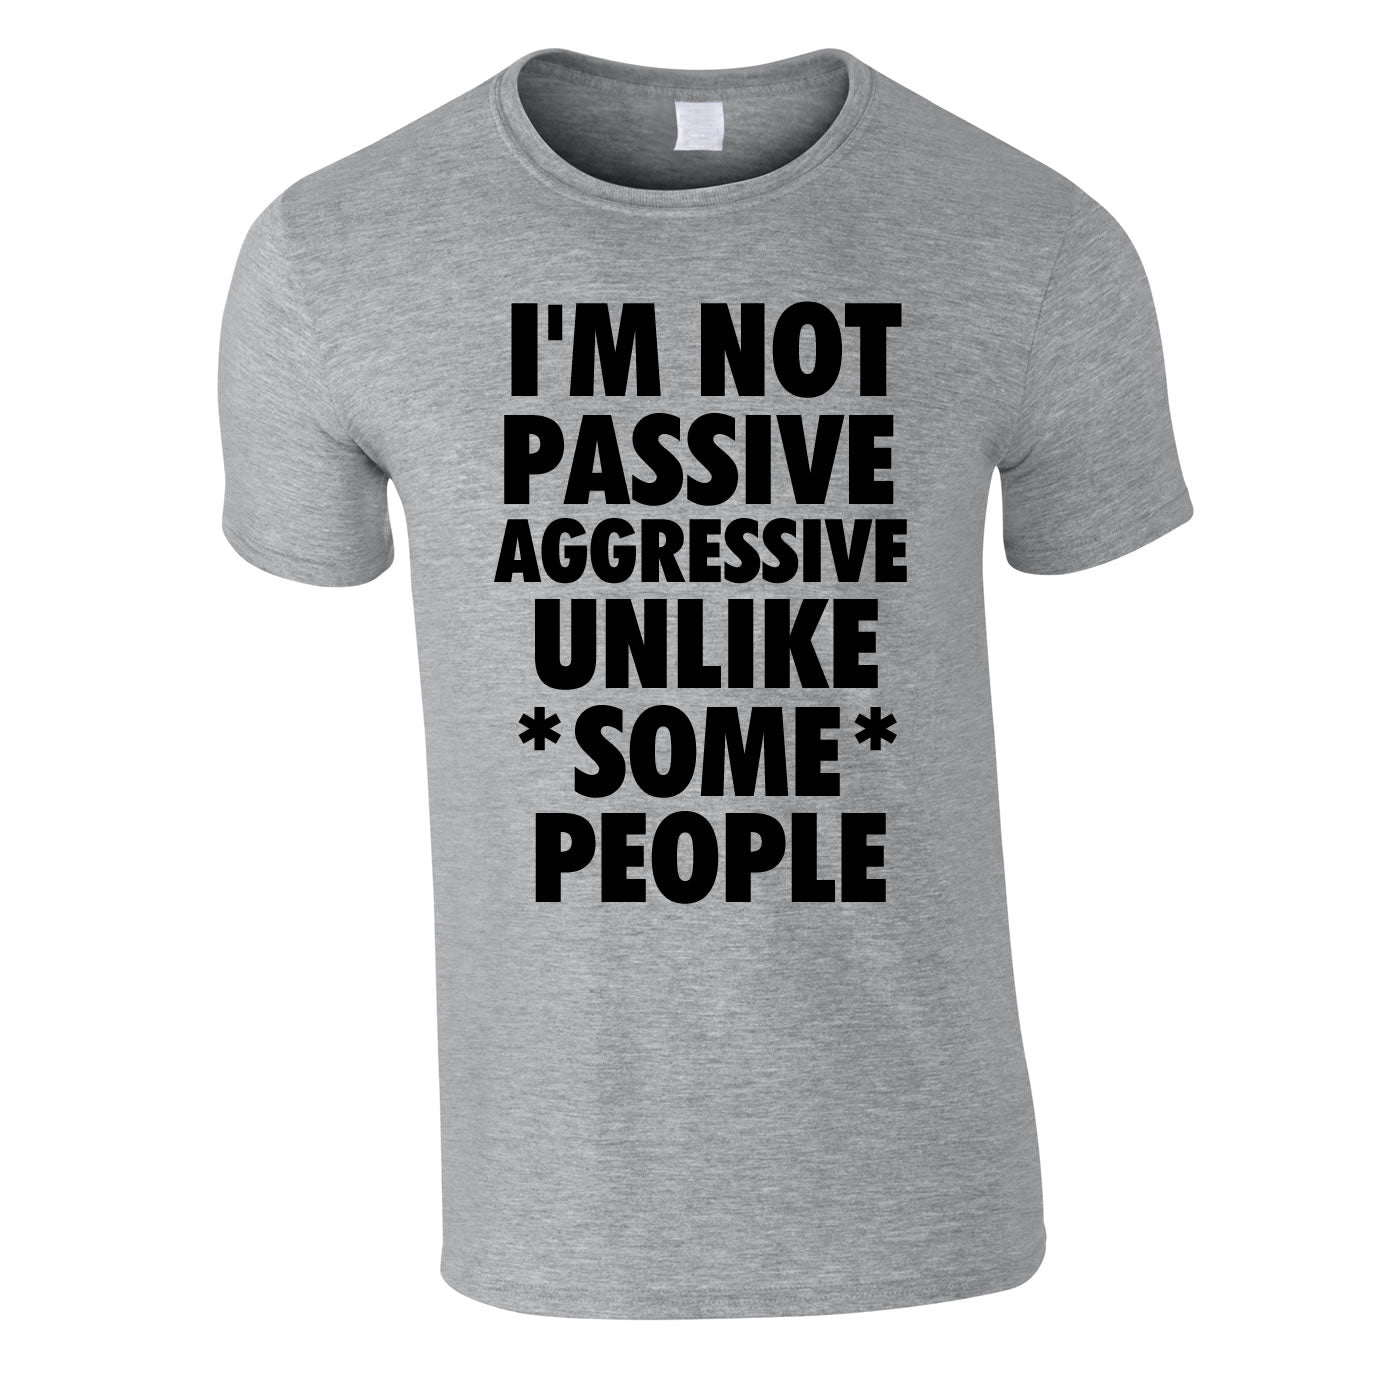 I'm not passive aggressive unlike some people